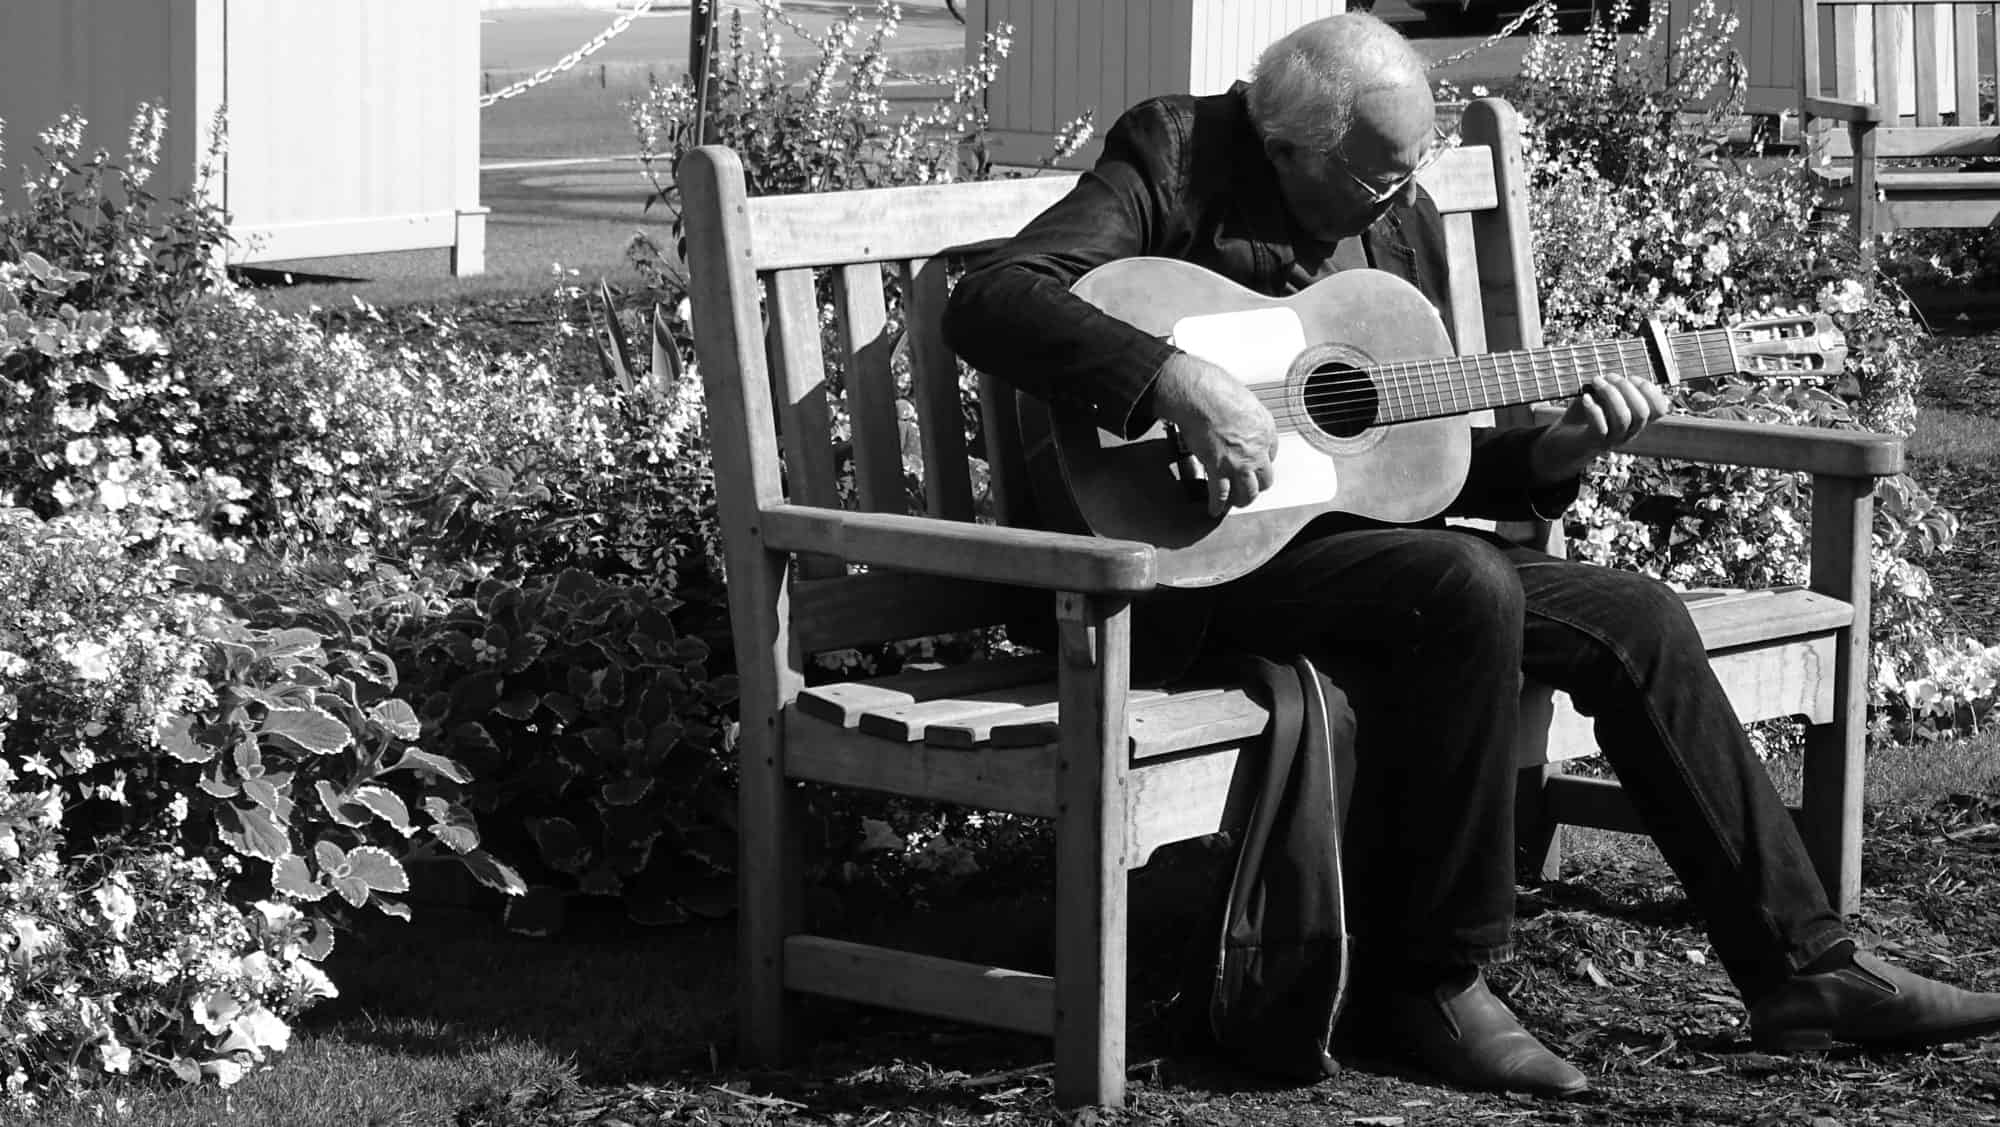 a senior man sitting on a bench playing the acoustic guitar - are you too old to learn guitar?